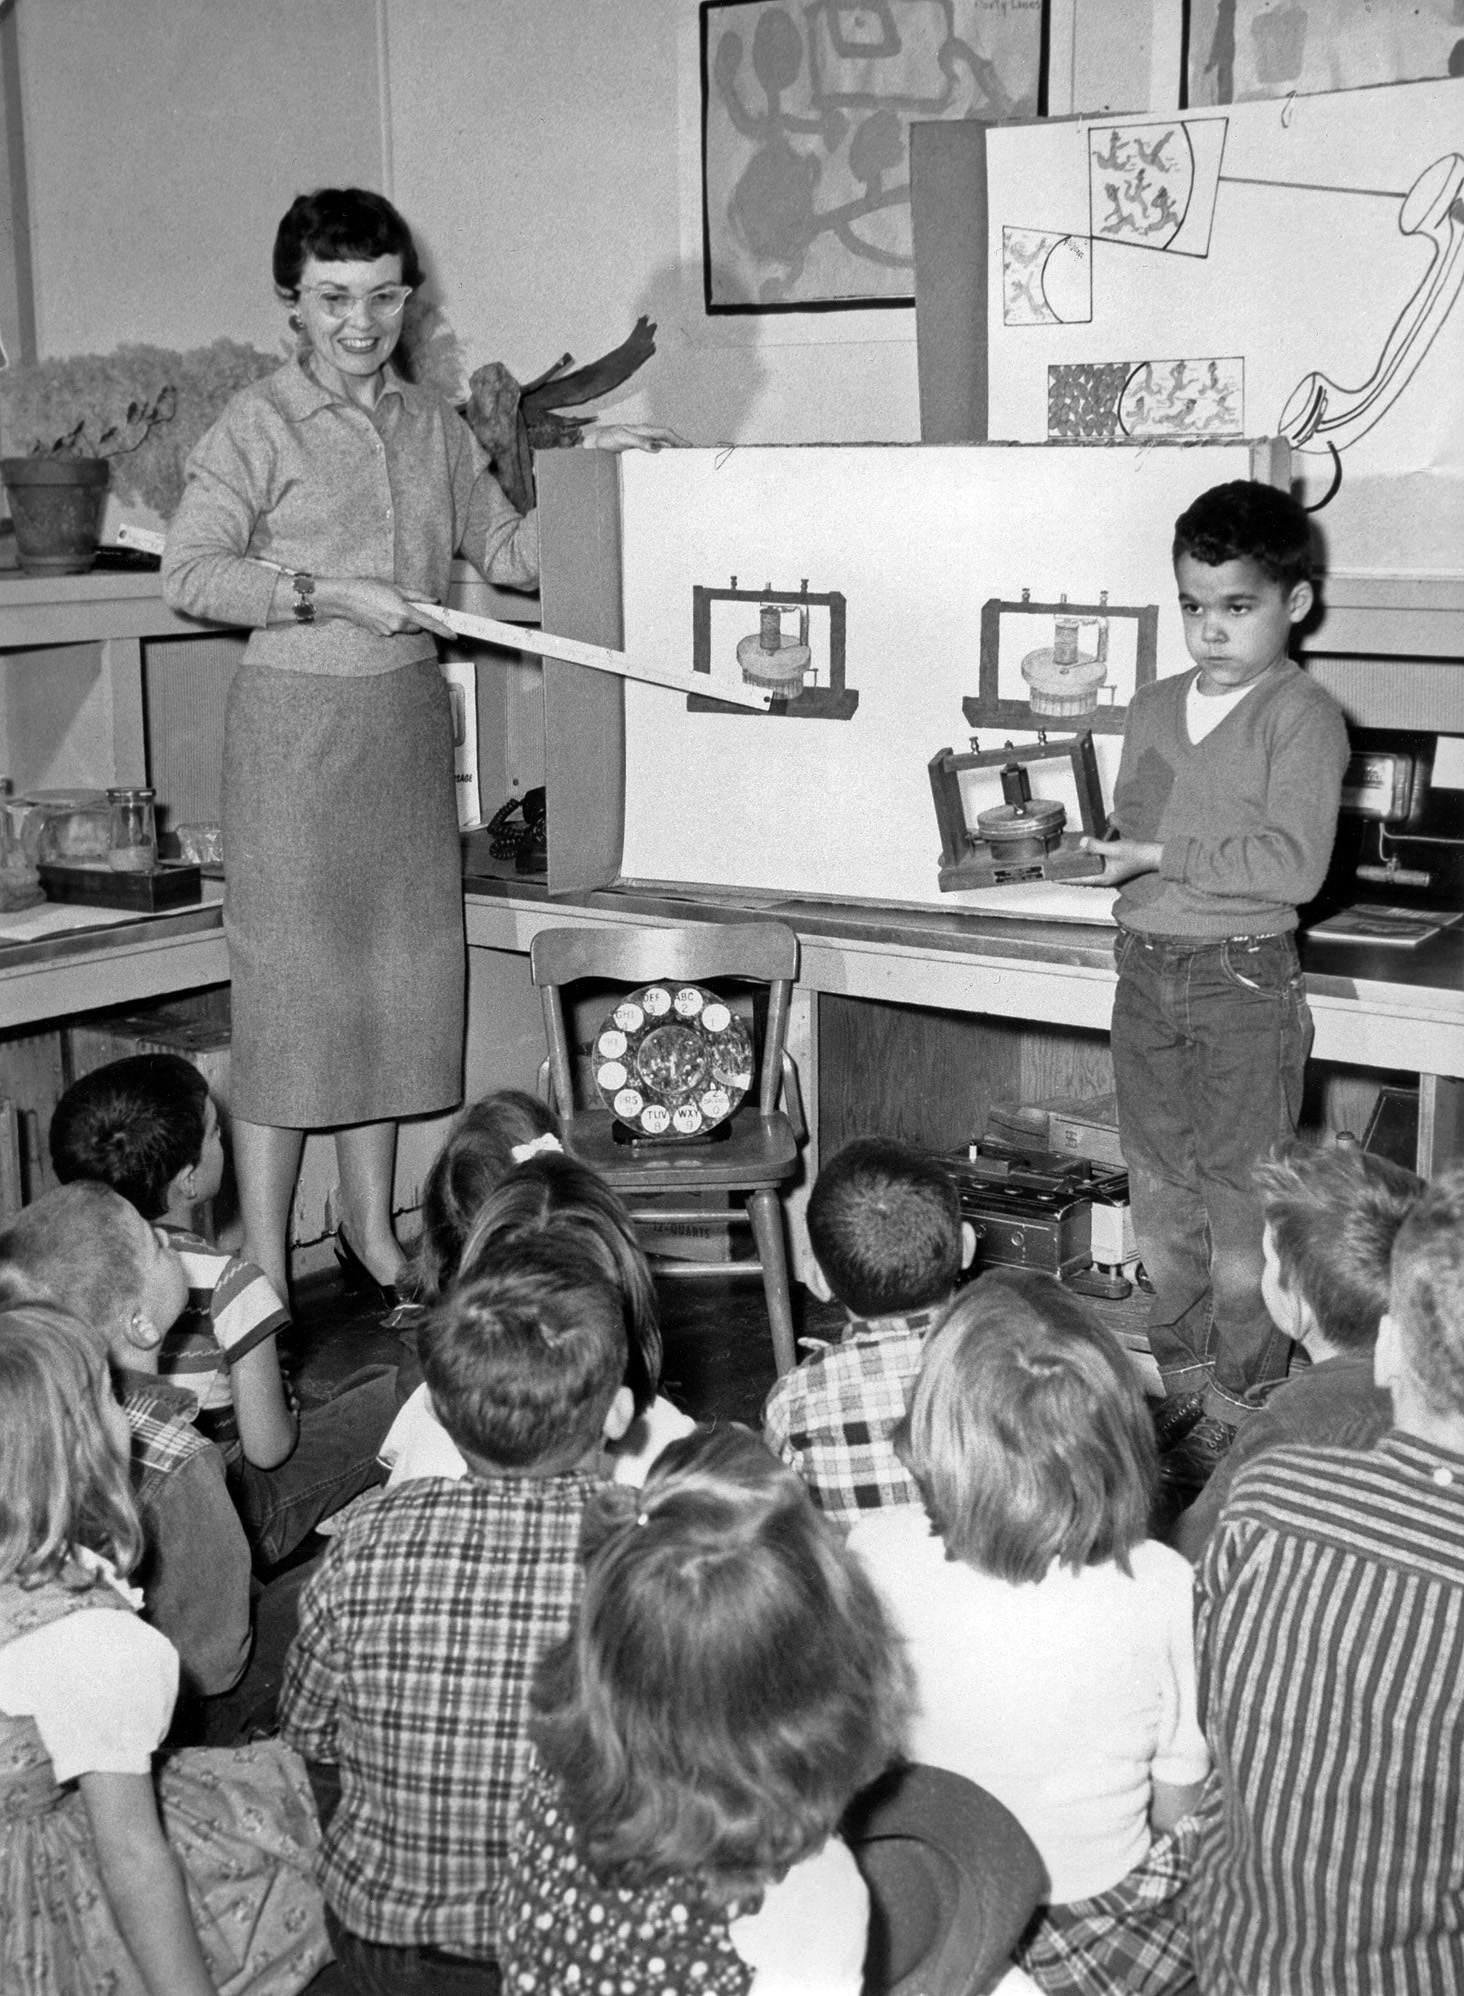 Kentfield, California 1958. Kindergarten class learning the finer points of the desktop telephone circa 1890s. Yours truly displaying said device. View full size.